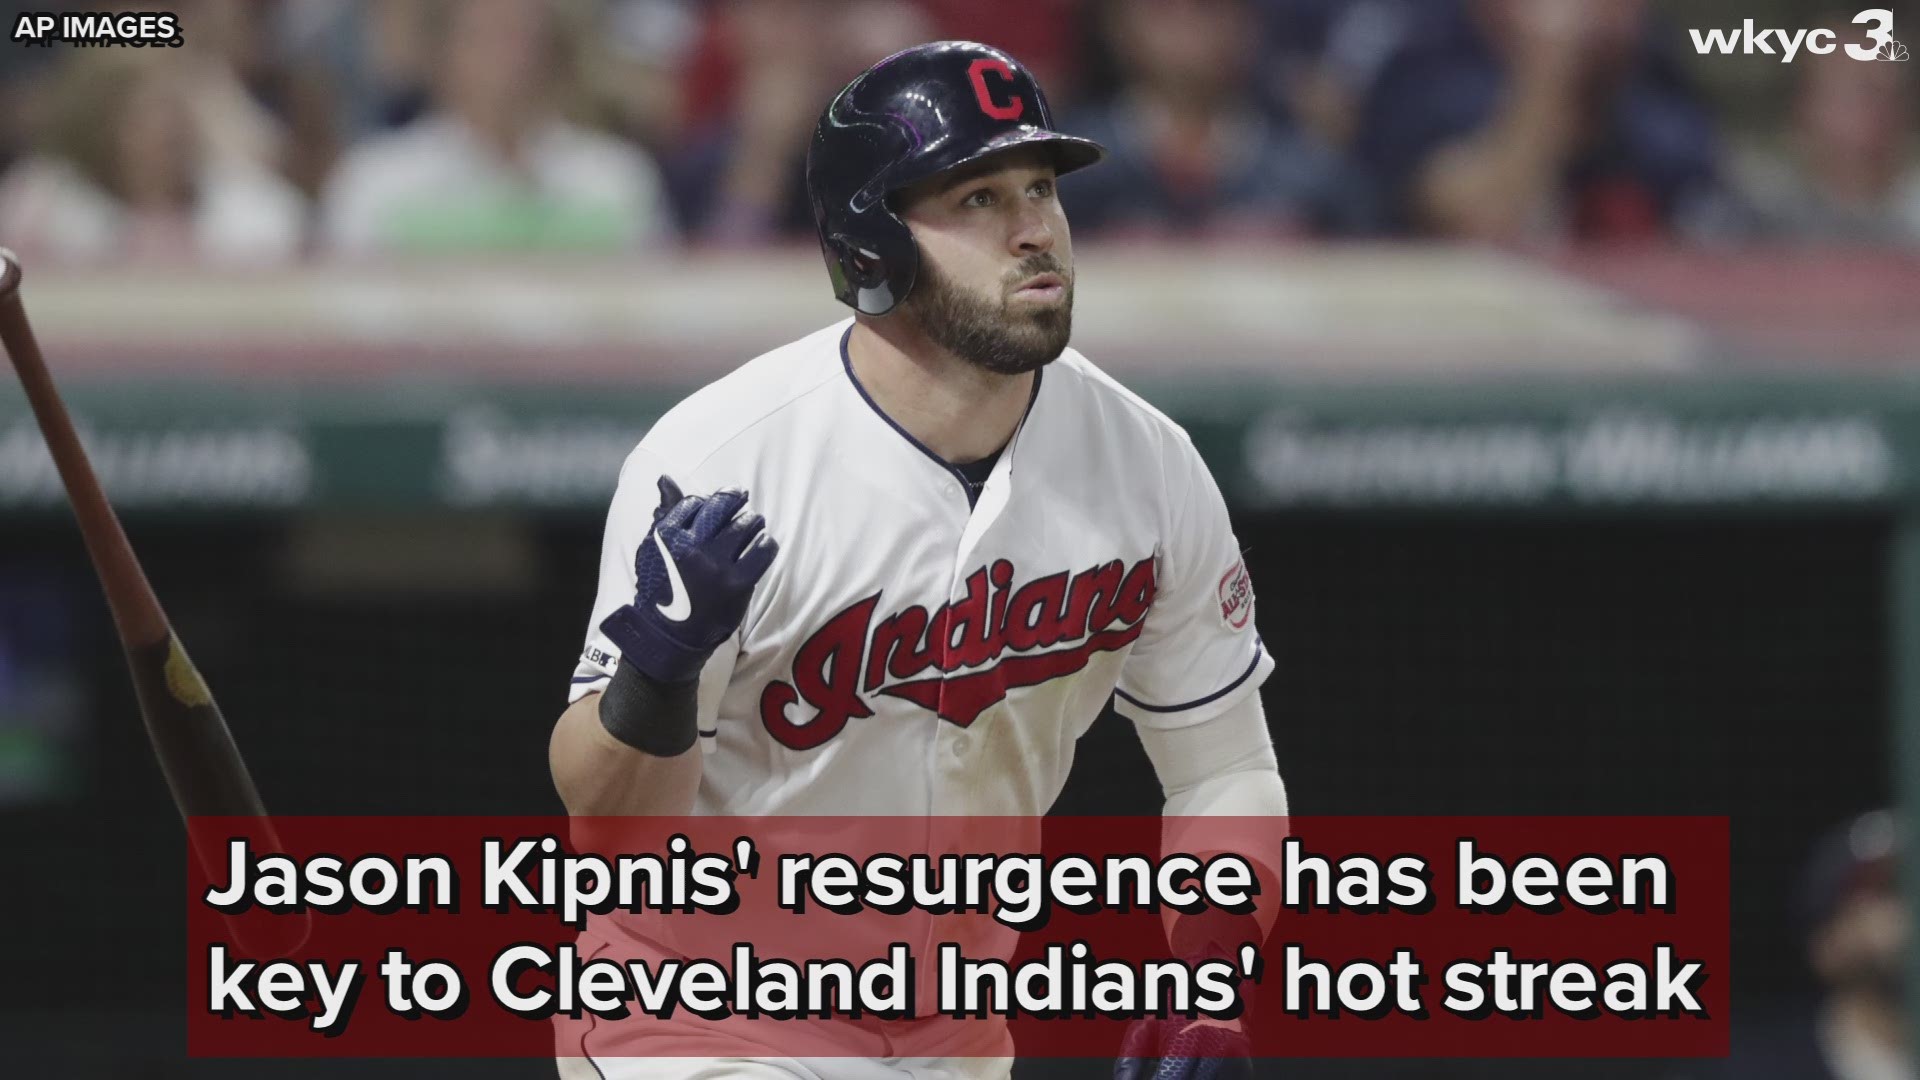 A surge in production from Jason Kipnis has helped make the Cleveland Indians one of baseball's hottest teams.